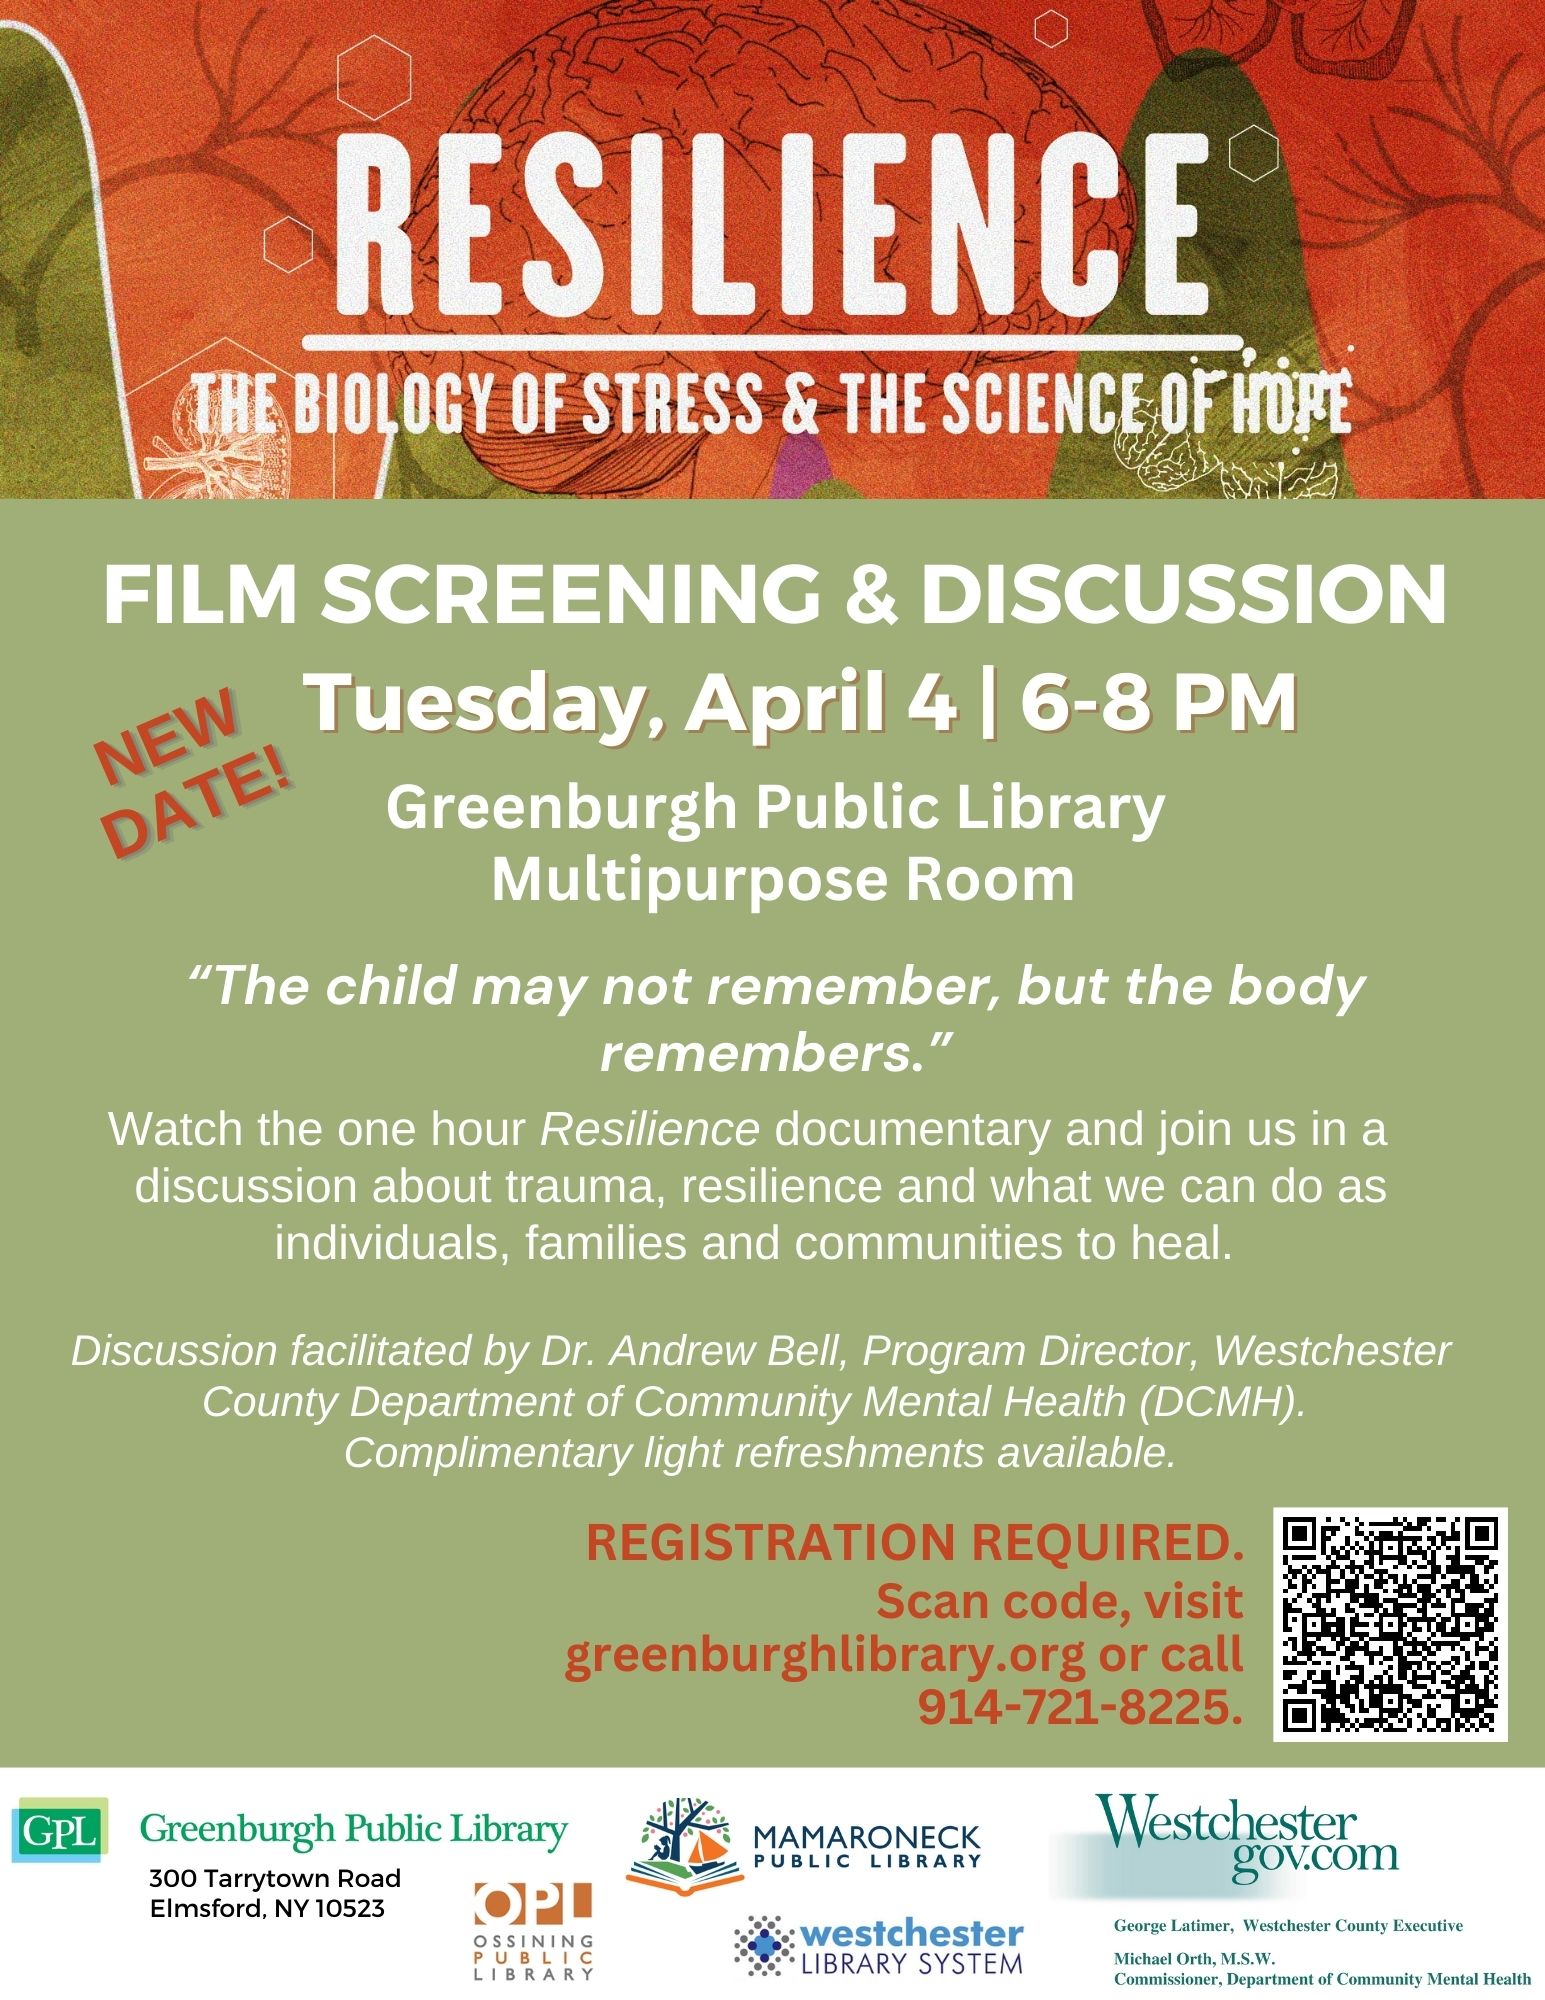 4/4 @ 6-8pm film screening & discussion: Resilience